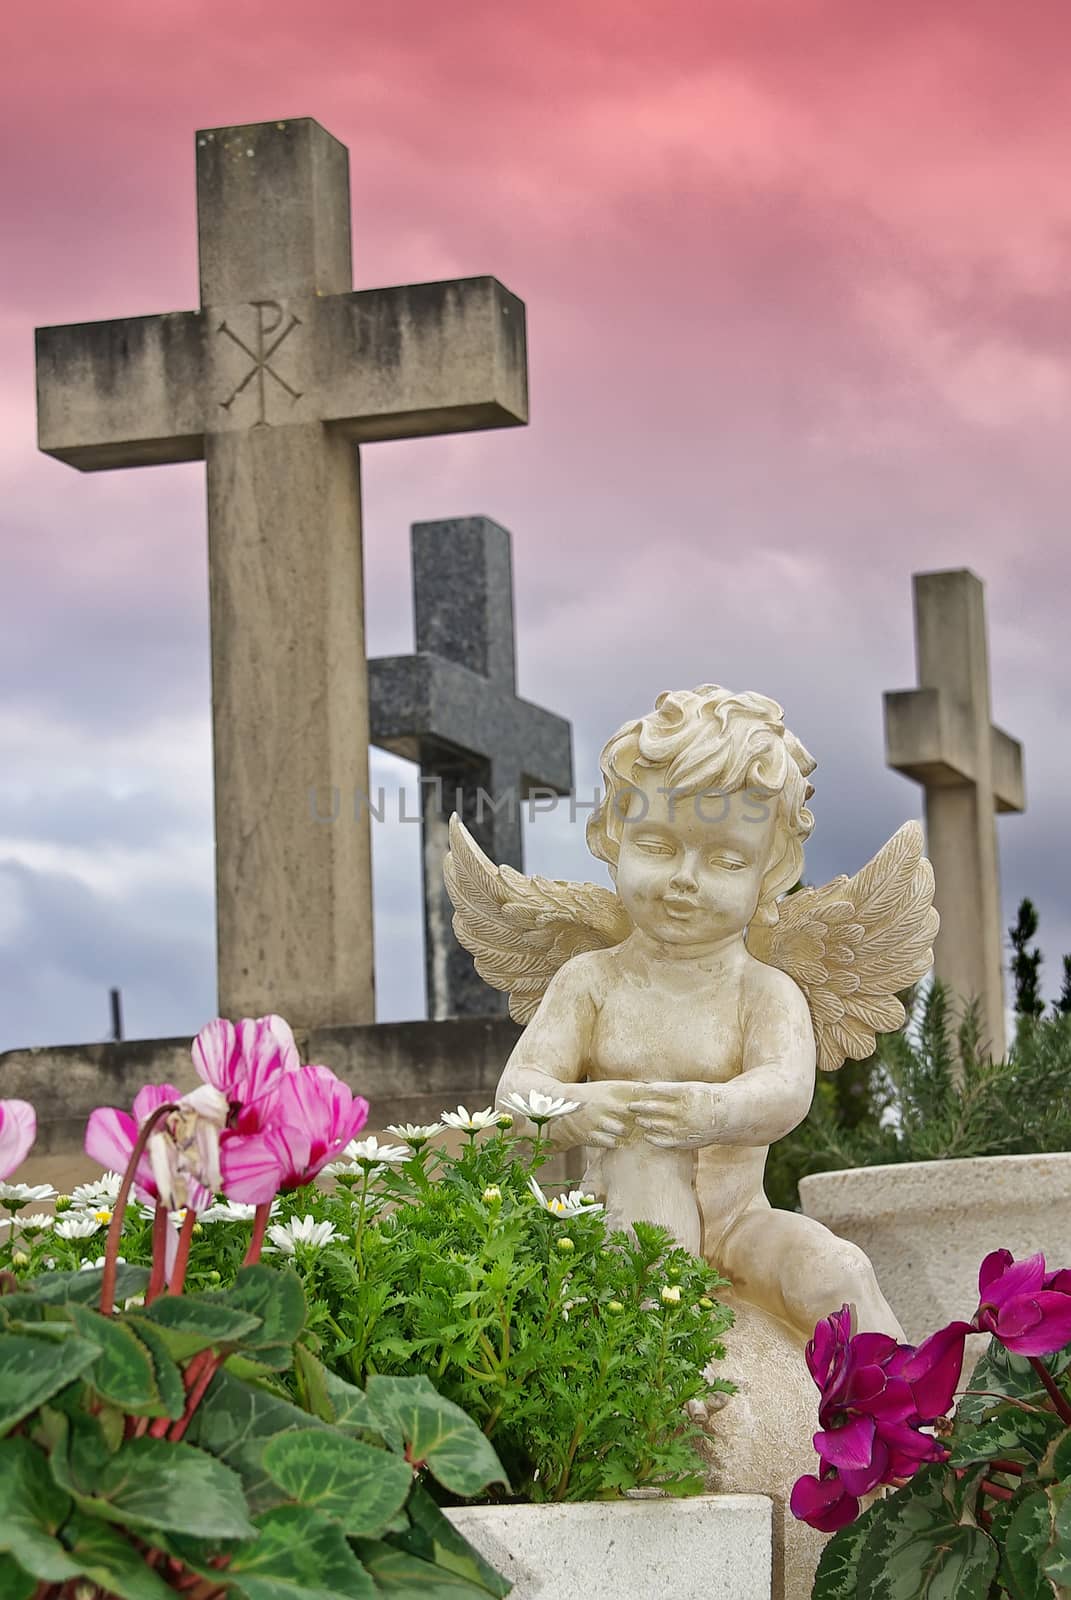 Statue of an angel boy located in a cemetery